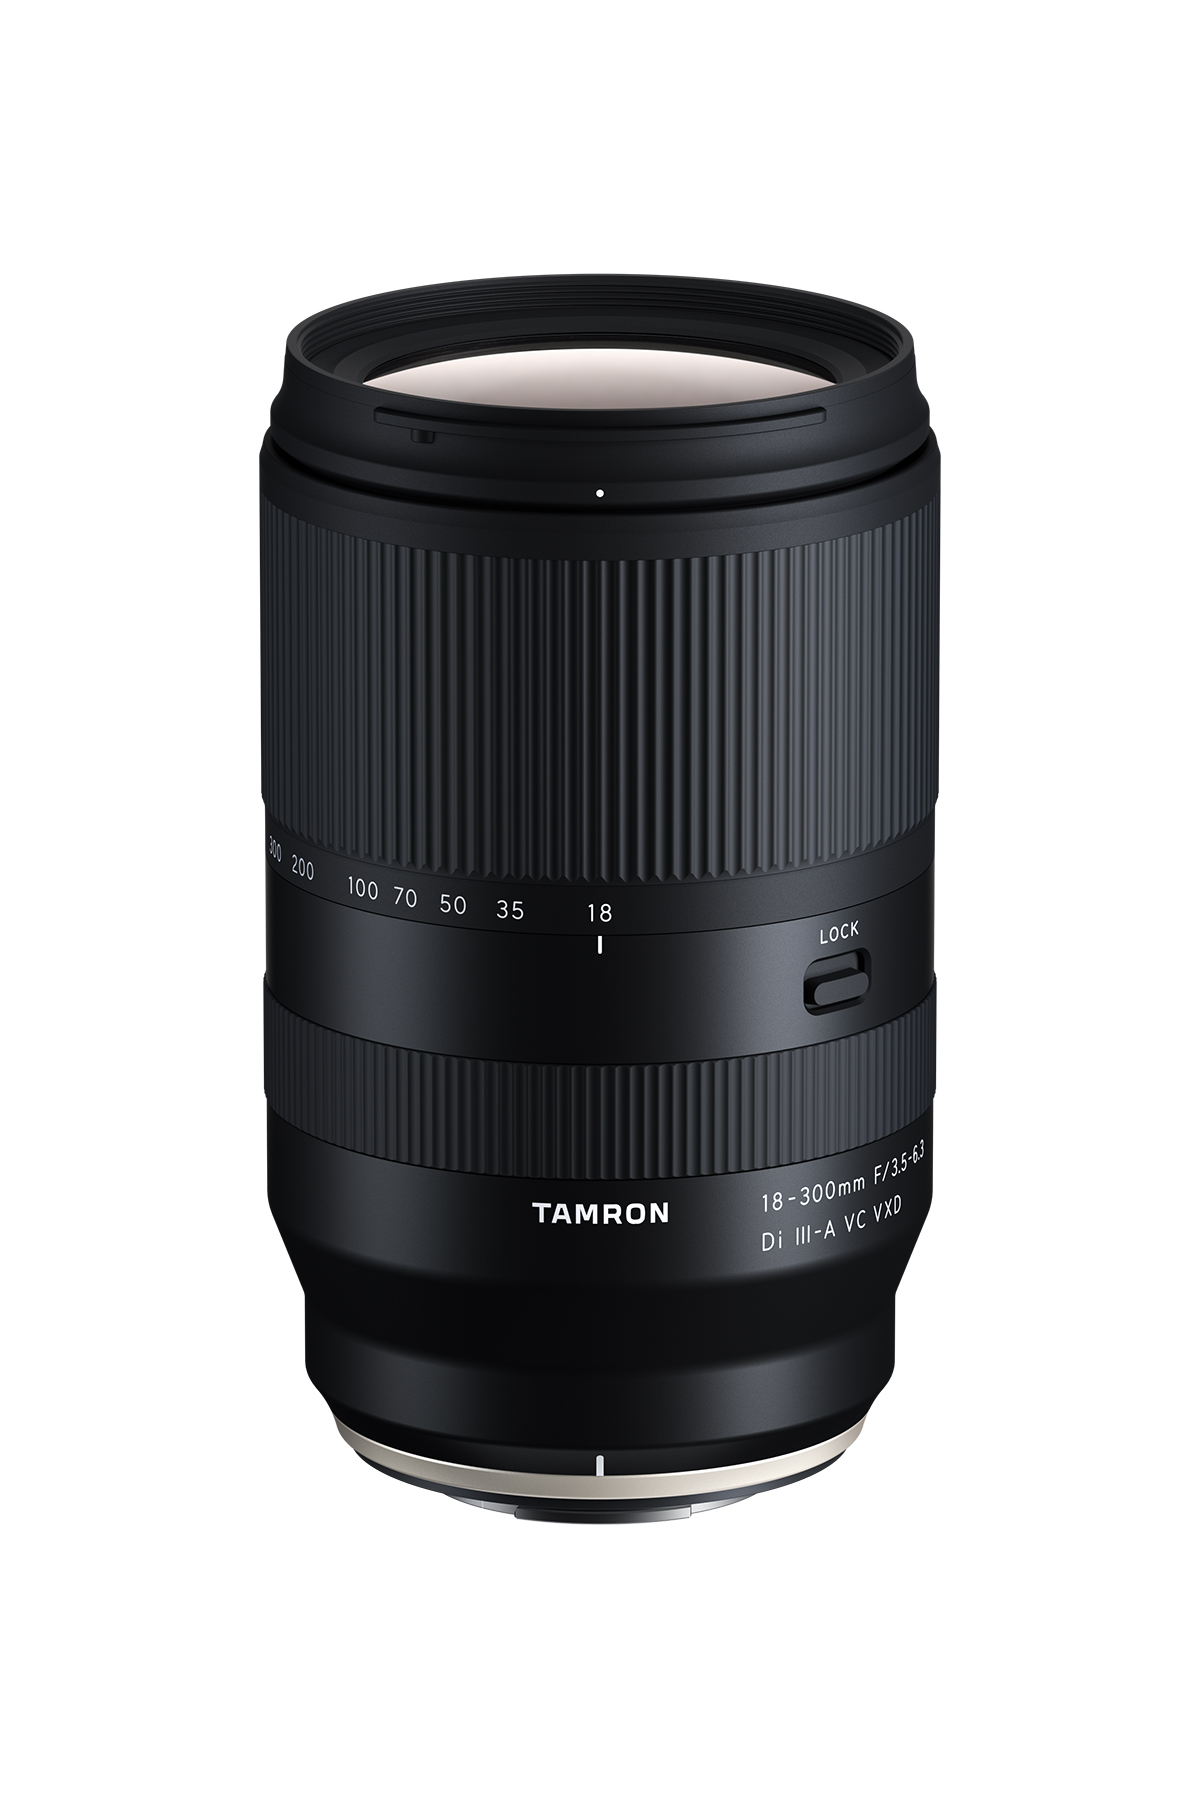 Why Tamron Is the Beginning of a Beautiful Thing for Fujifilm